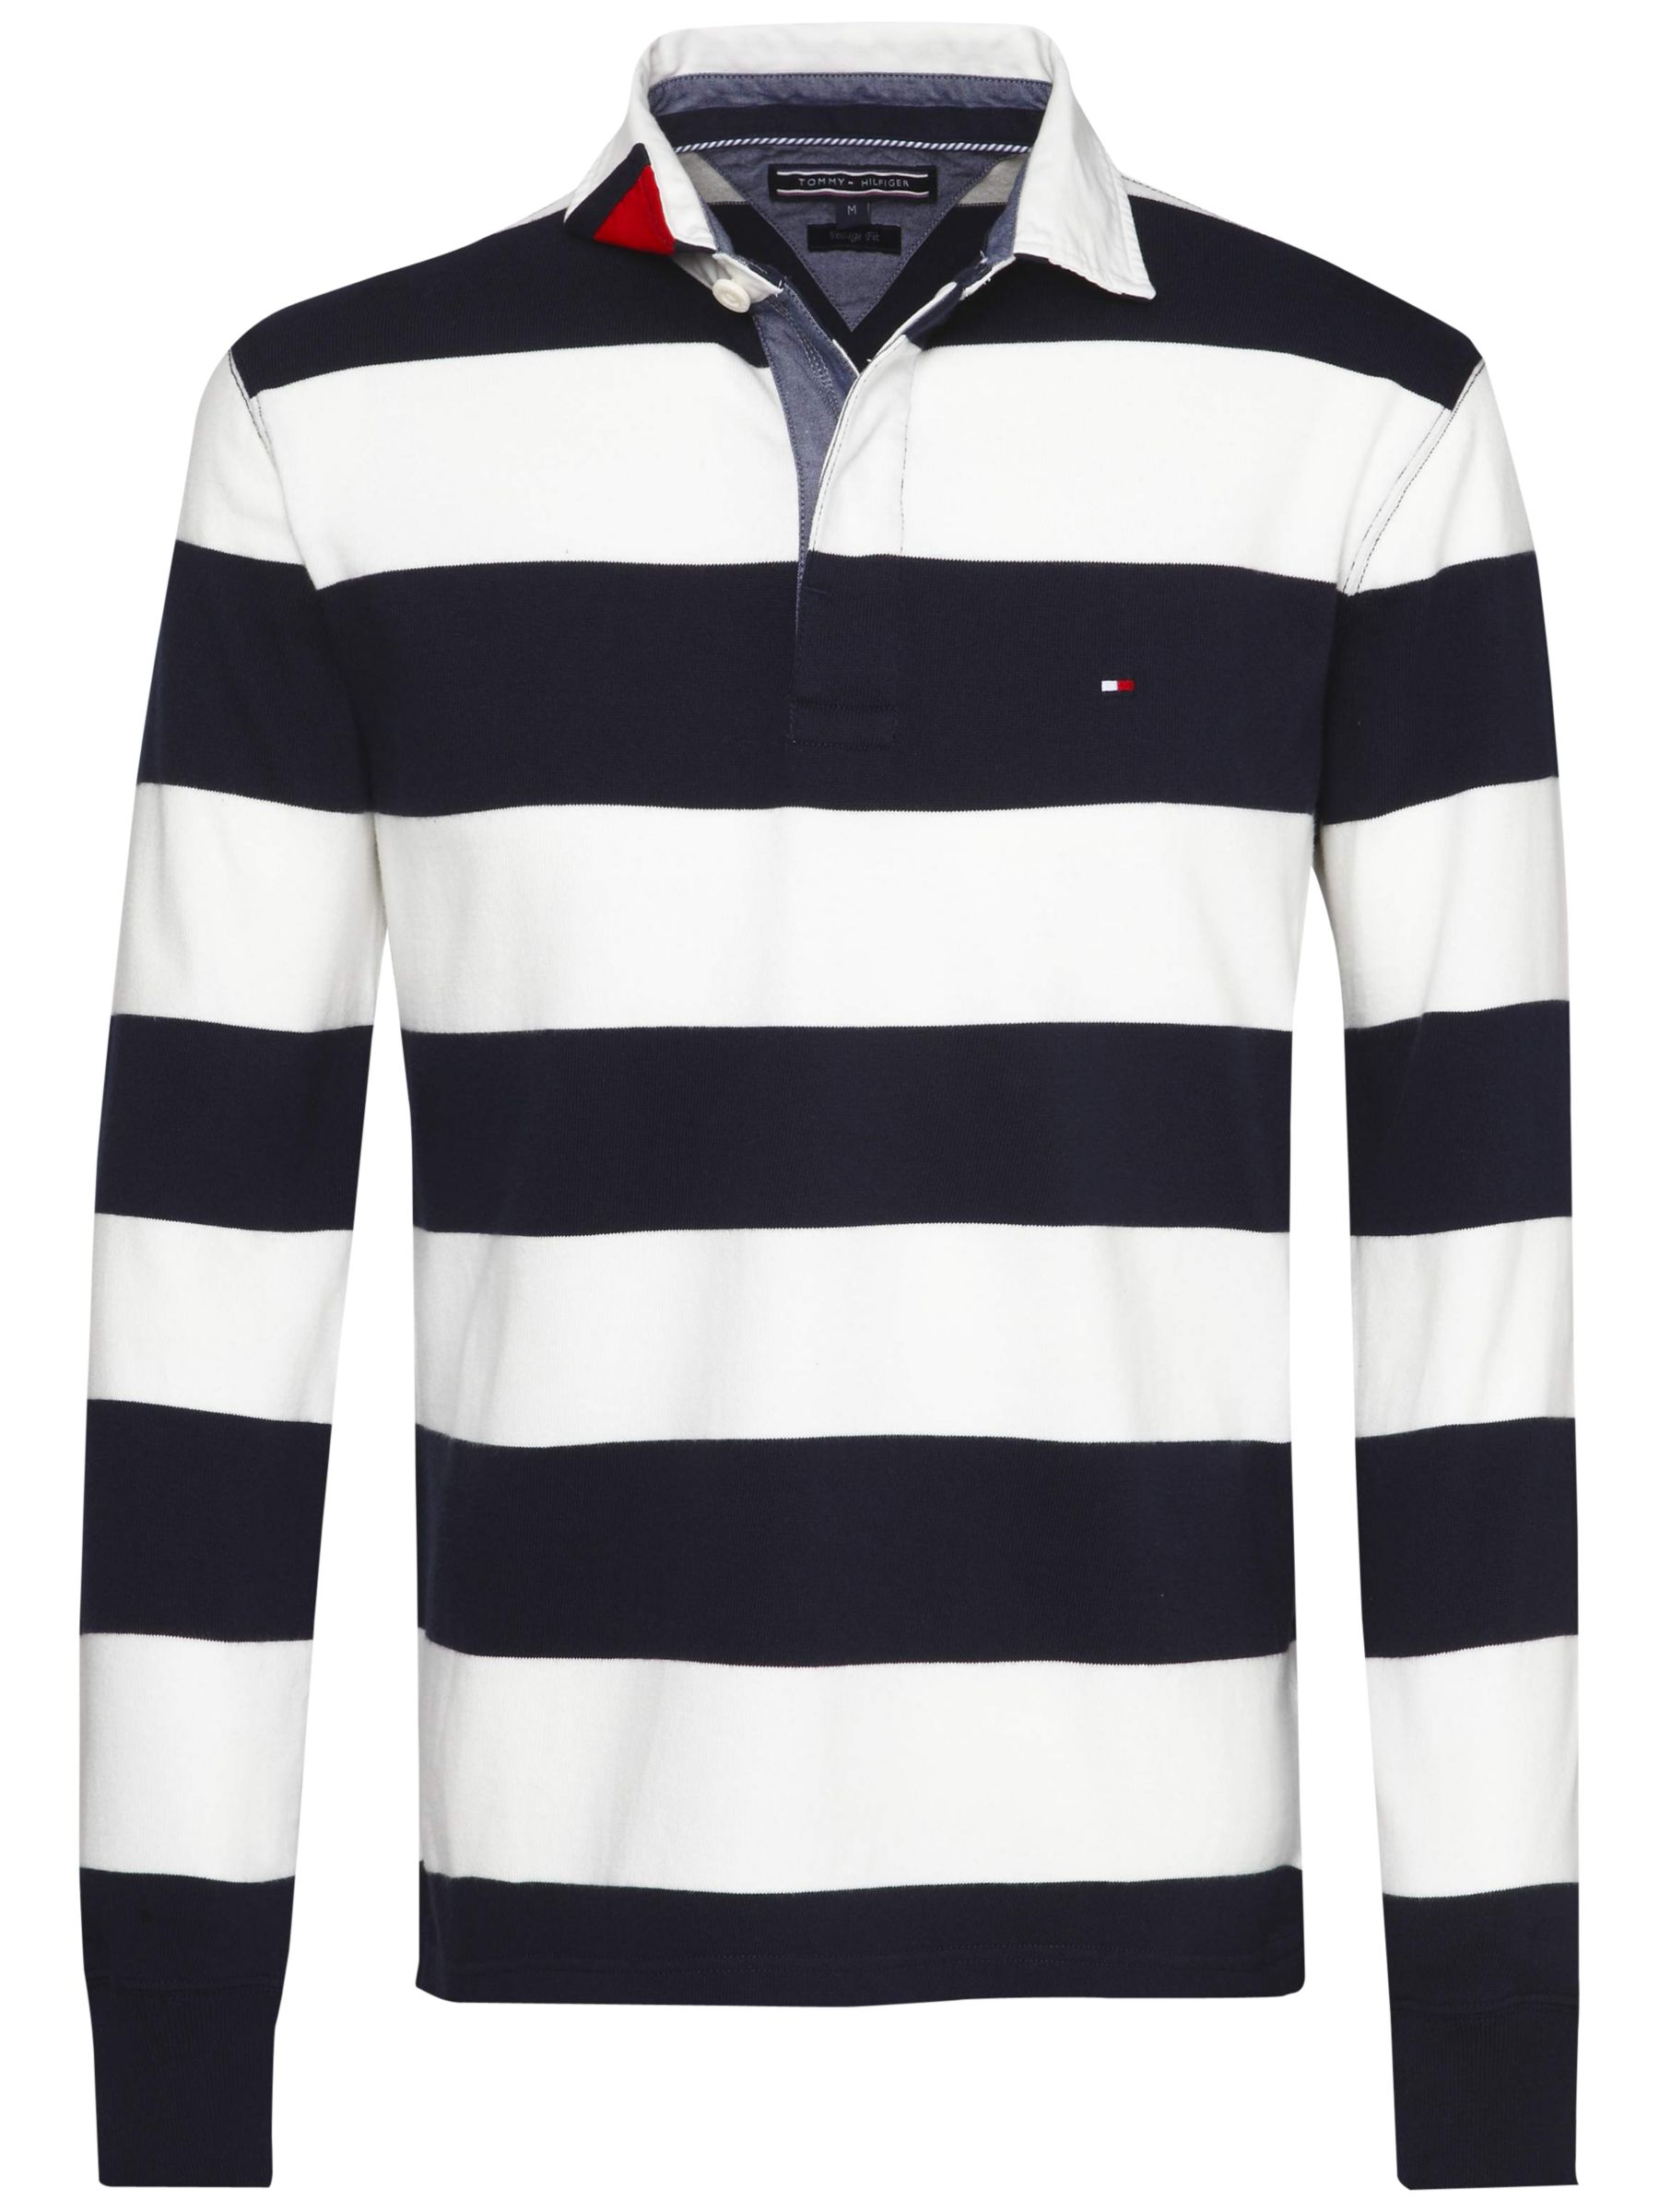 tommy rugby top